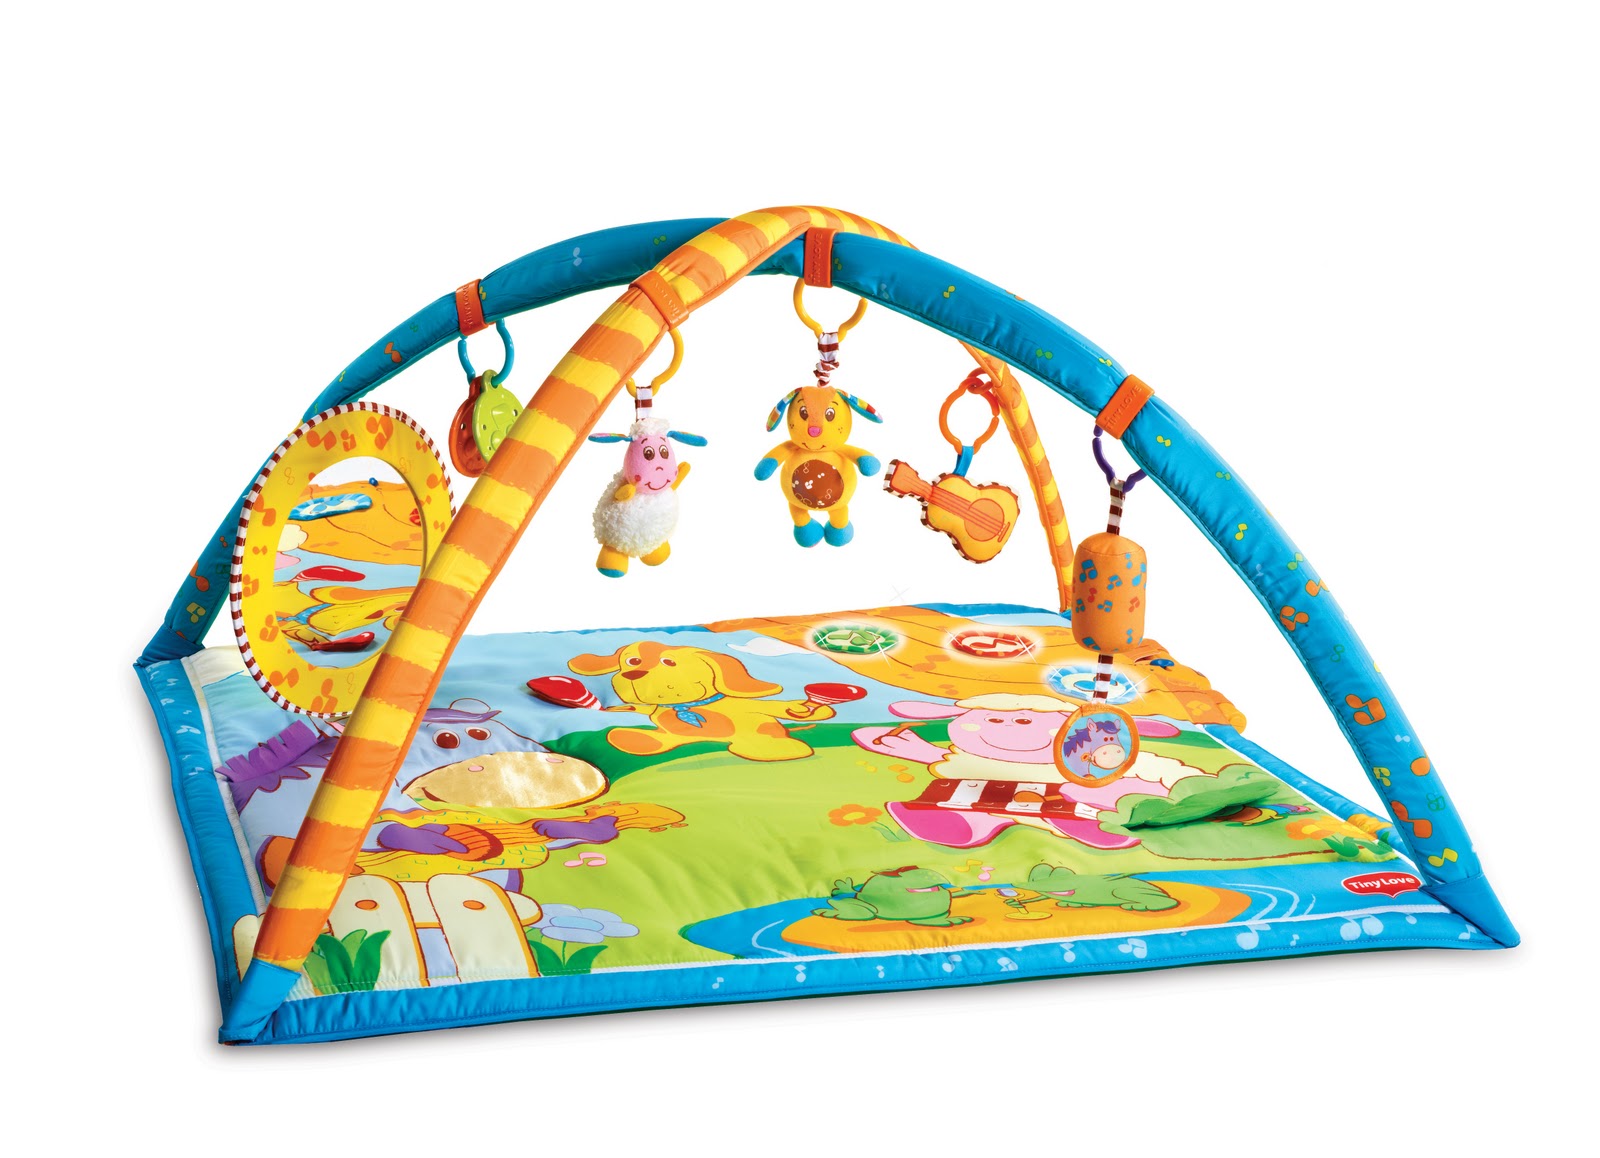 Fisher Price Kick & Play Piano Gym Make Baby a Star with Kmart